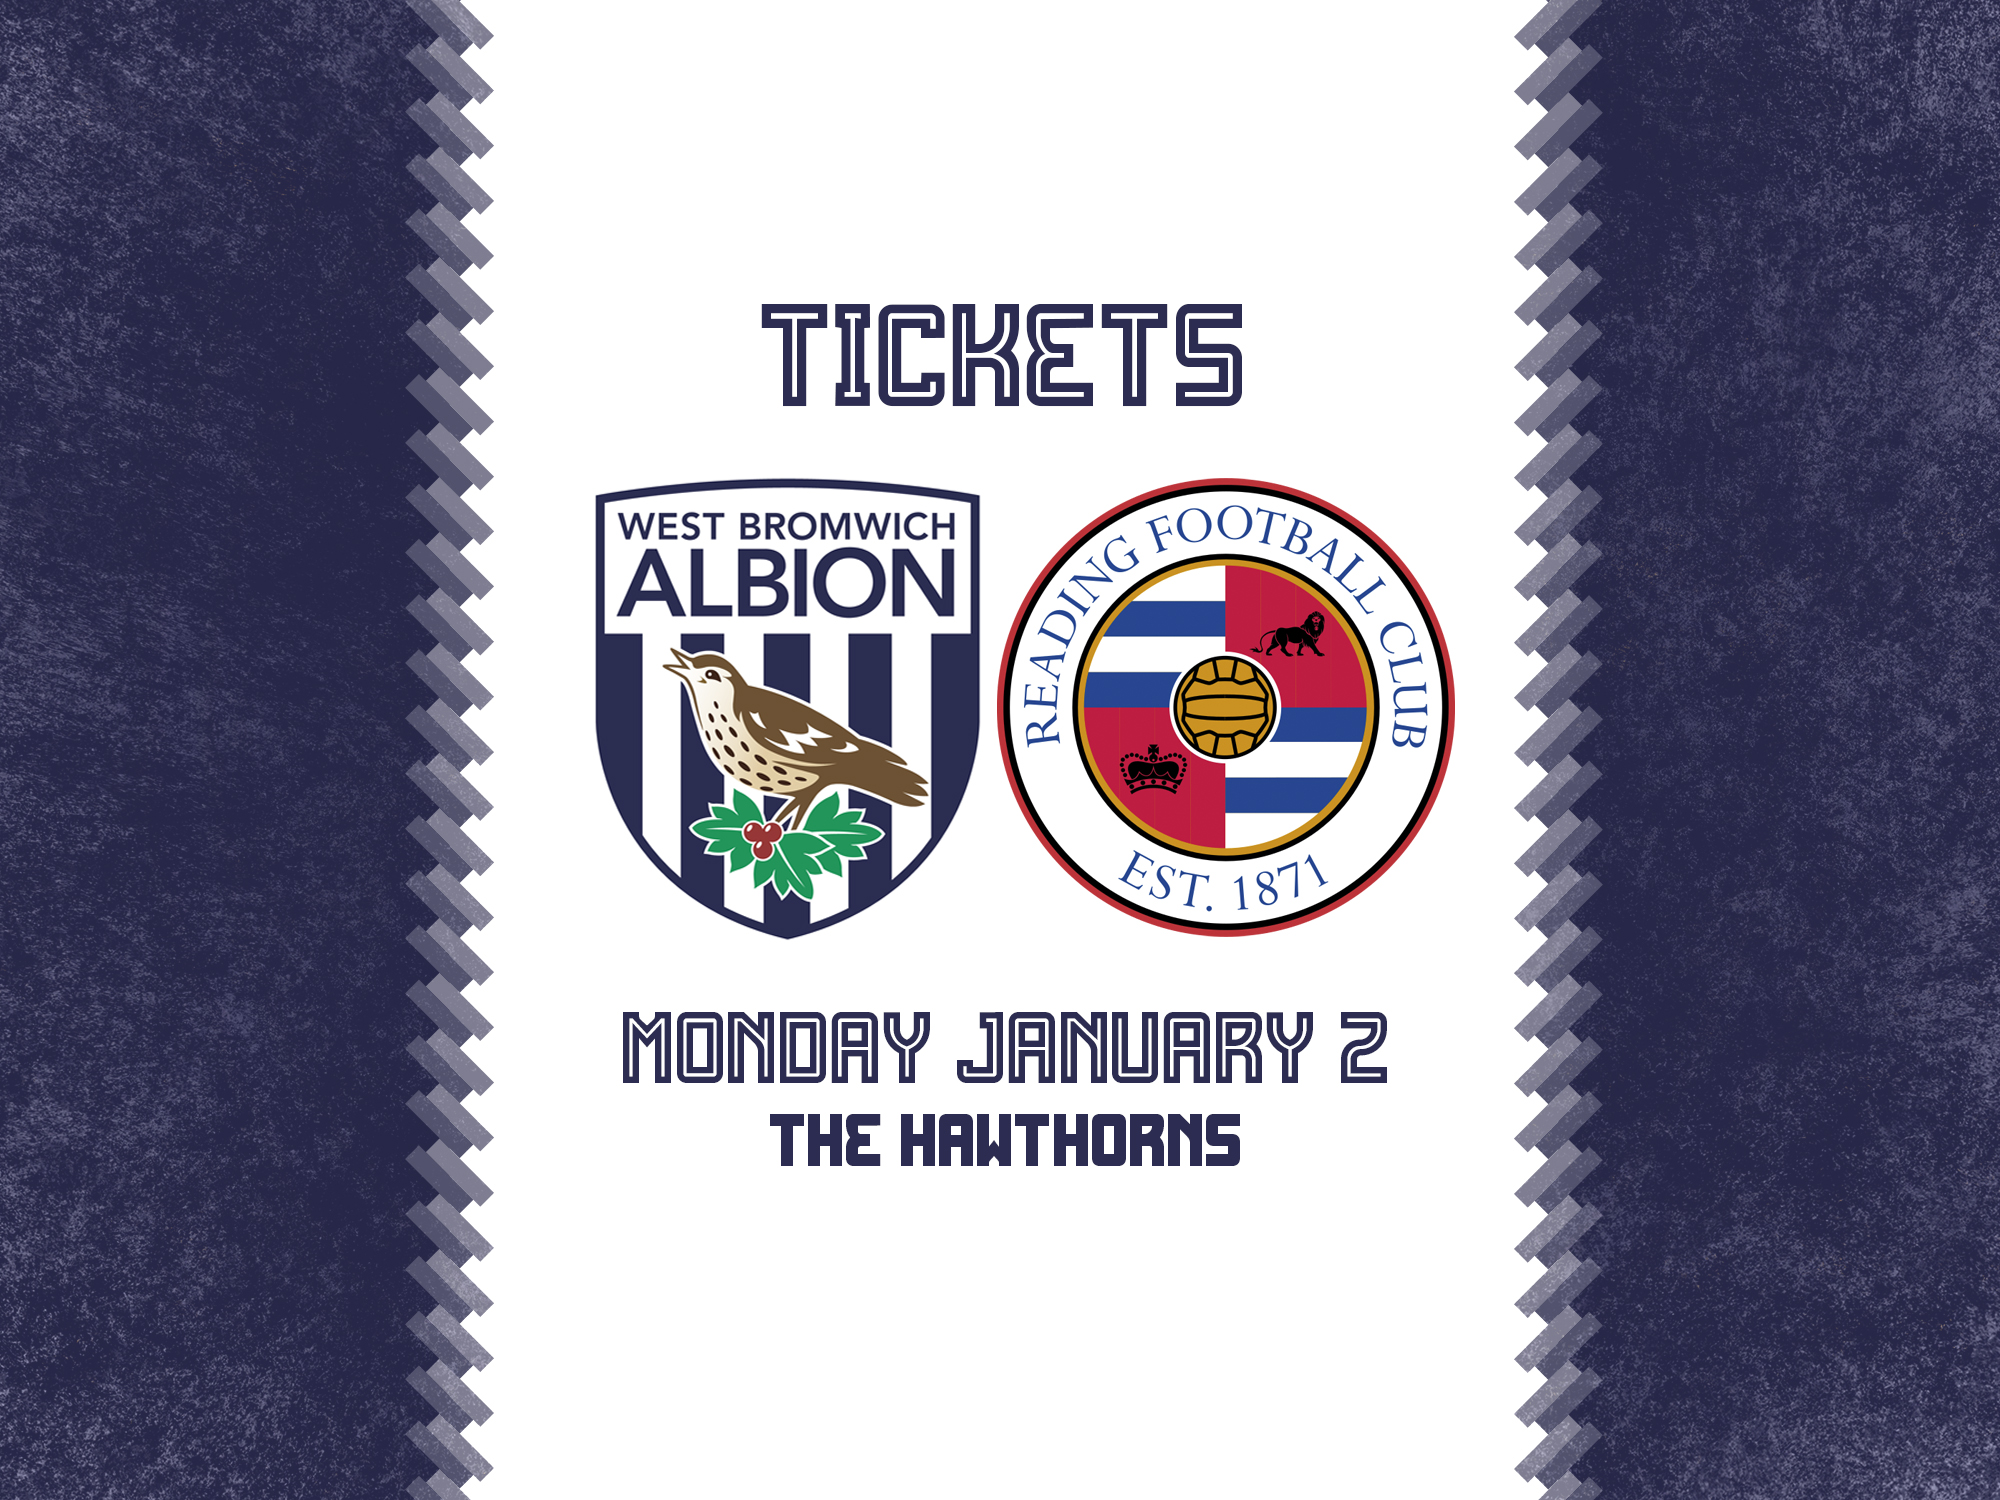 A ticket graphic advertising Albion's match against Reading